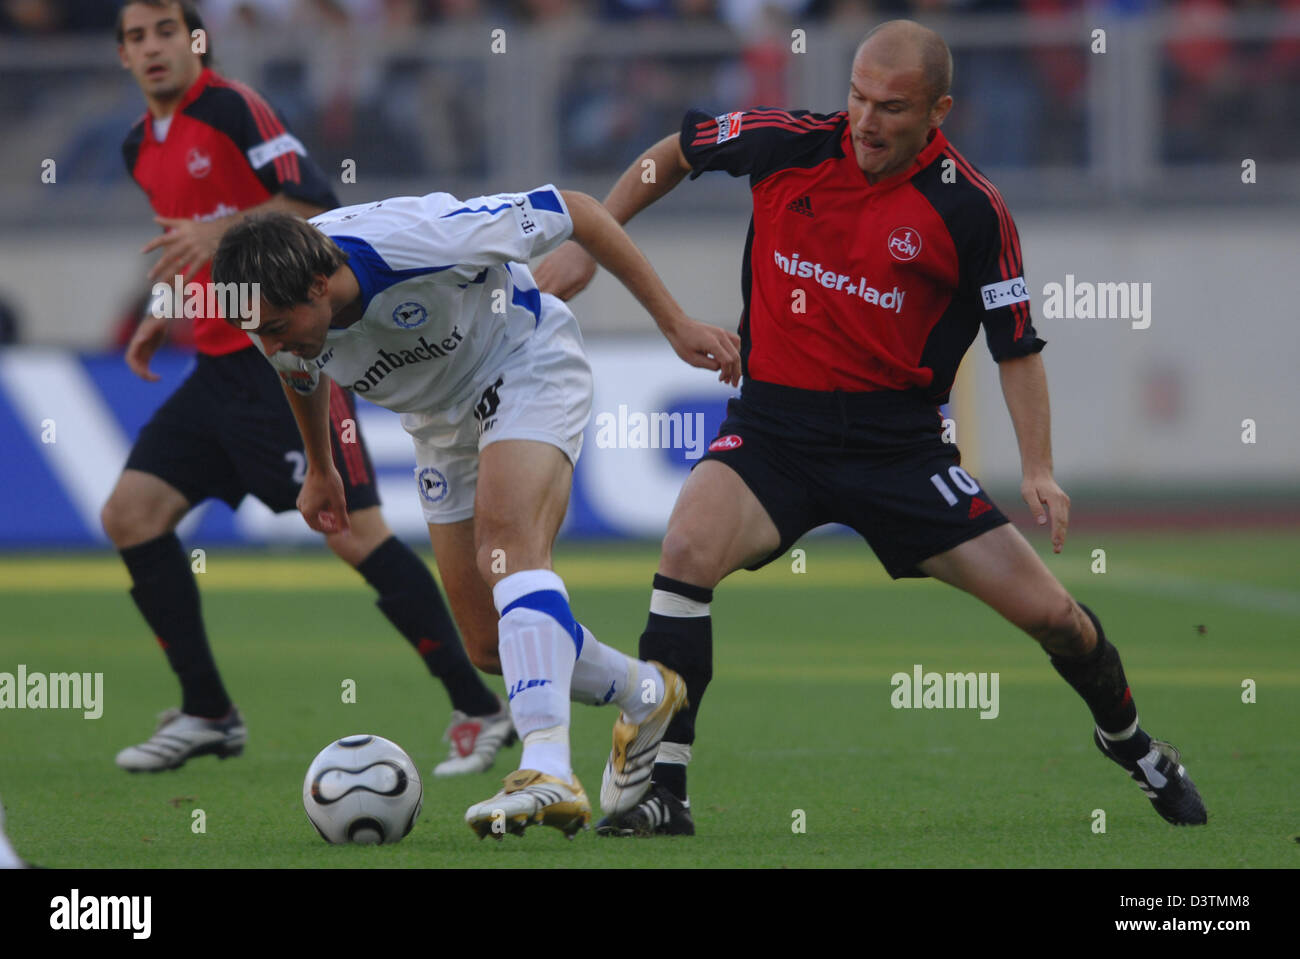 Ivica Banovic (R) and Horacio Javier Pinola of Nuremberg vie for the ball with Heiko Westermann (C) of Bielefeld during the Bundesliga match Nuremberg vs Arminia Bielefeld in Nuremberg, Germany, Sunday 15 October 2006. Photo: Armin Weigel (ATTENTION: EMBARGO! The DFL permits the further utilisation of the pictures in IPTV, mobile services and other new technologies only two hours a Stock Photo